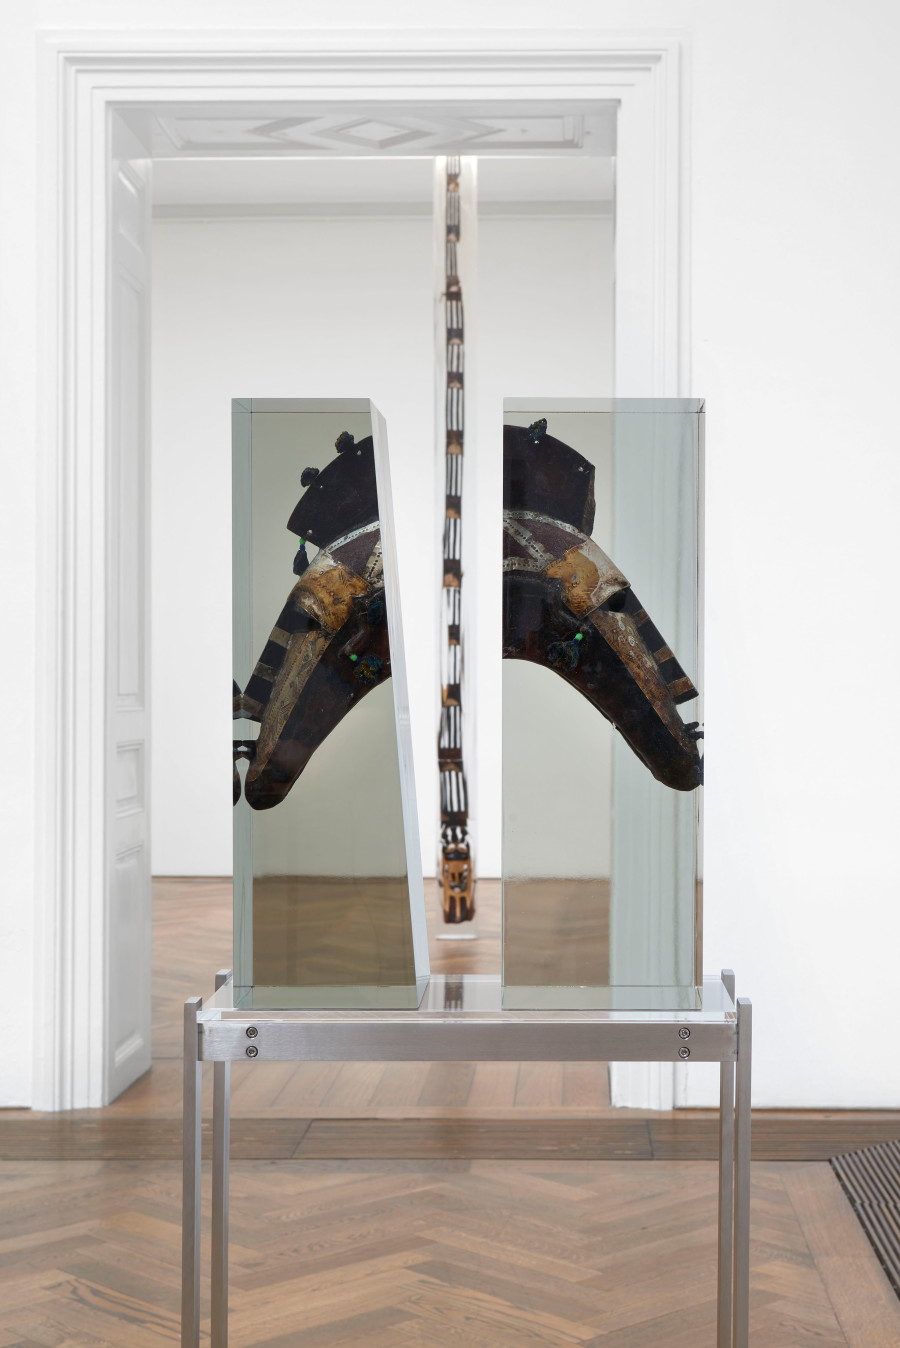 Matthew Angelo Harrison, installation view, Proto, Kunsthalle Basel, 2021, view on, Masks for Manhood, 2021 (front), and, Celestial Tower, 2021 (back). Photo: Philipp Hänger / Kunsthalle Basel